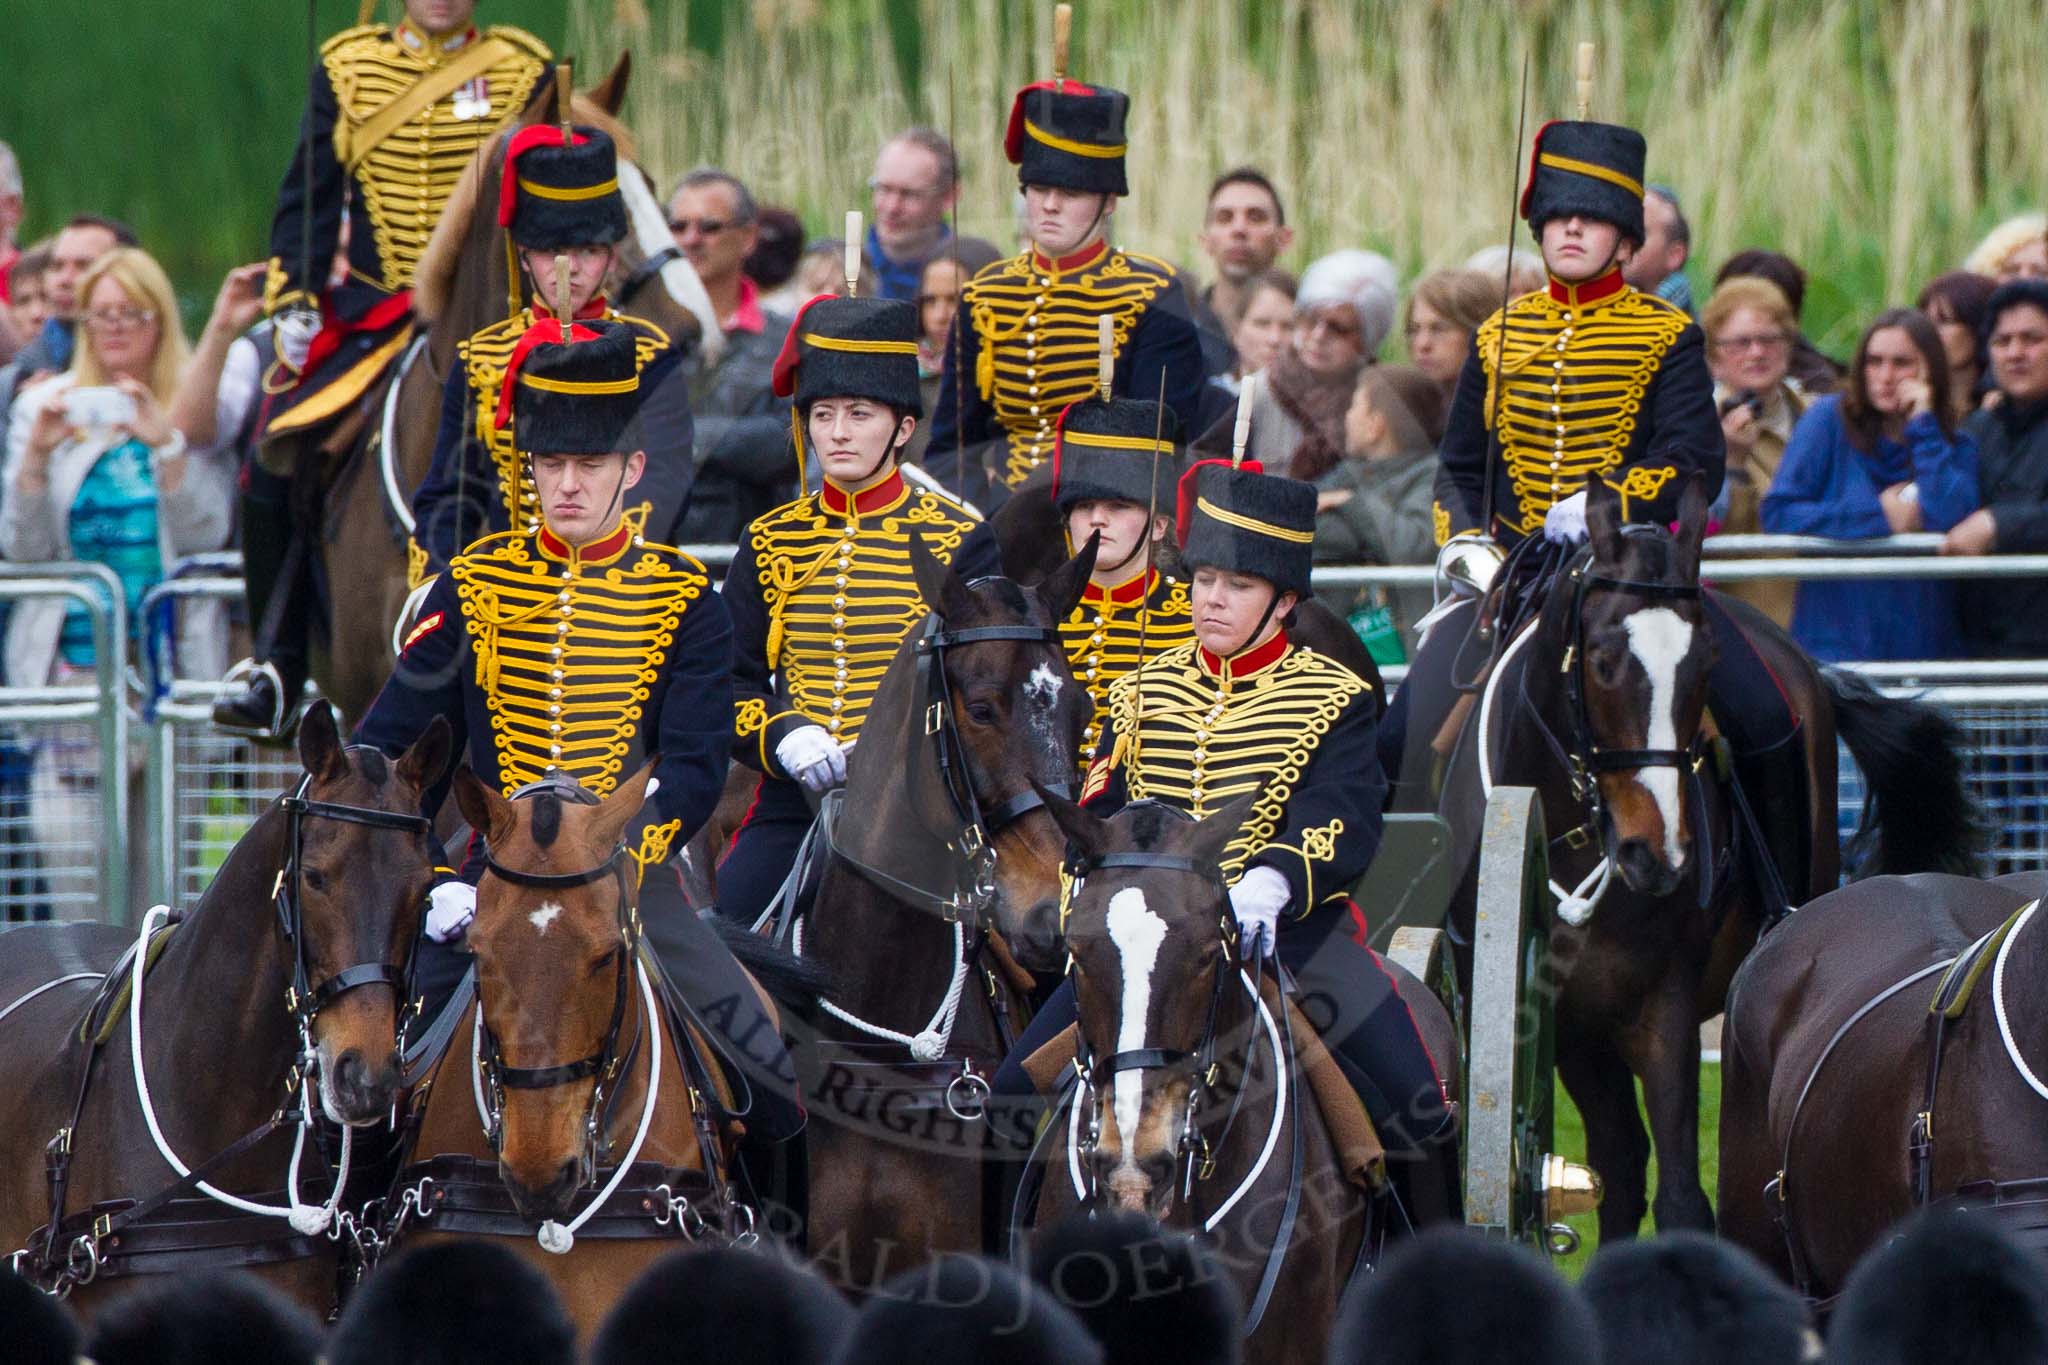 Major General's Review 2013: A closer look at The King's Troop Royal Horse Artillery..
Horse Guards Parade, Westminster,
London SW1,

United Kingdom,
on 01 June 2013 at 10:41, image #173